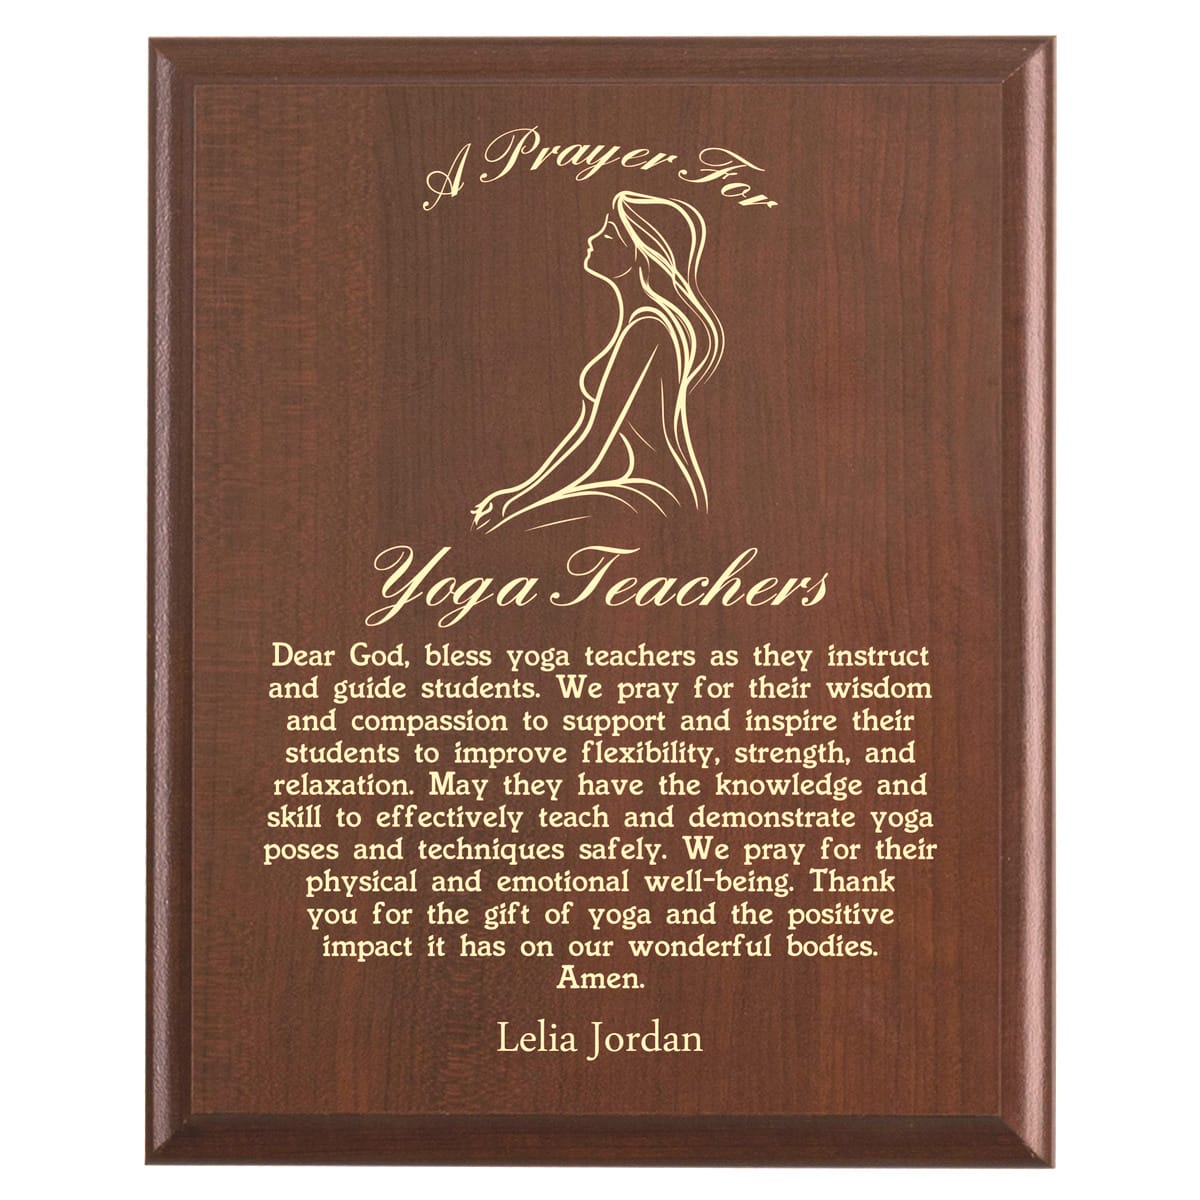 Plaque photo: Yoga Instructor Prayer Plaque design with free personalization. Wood style finish with customized text.